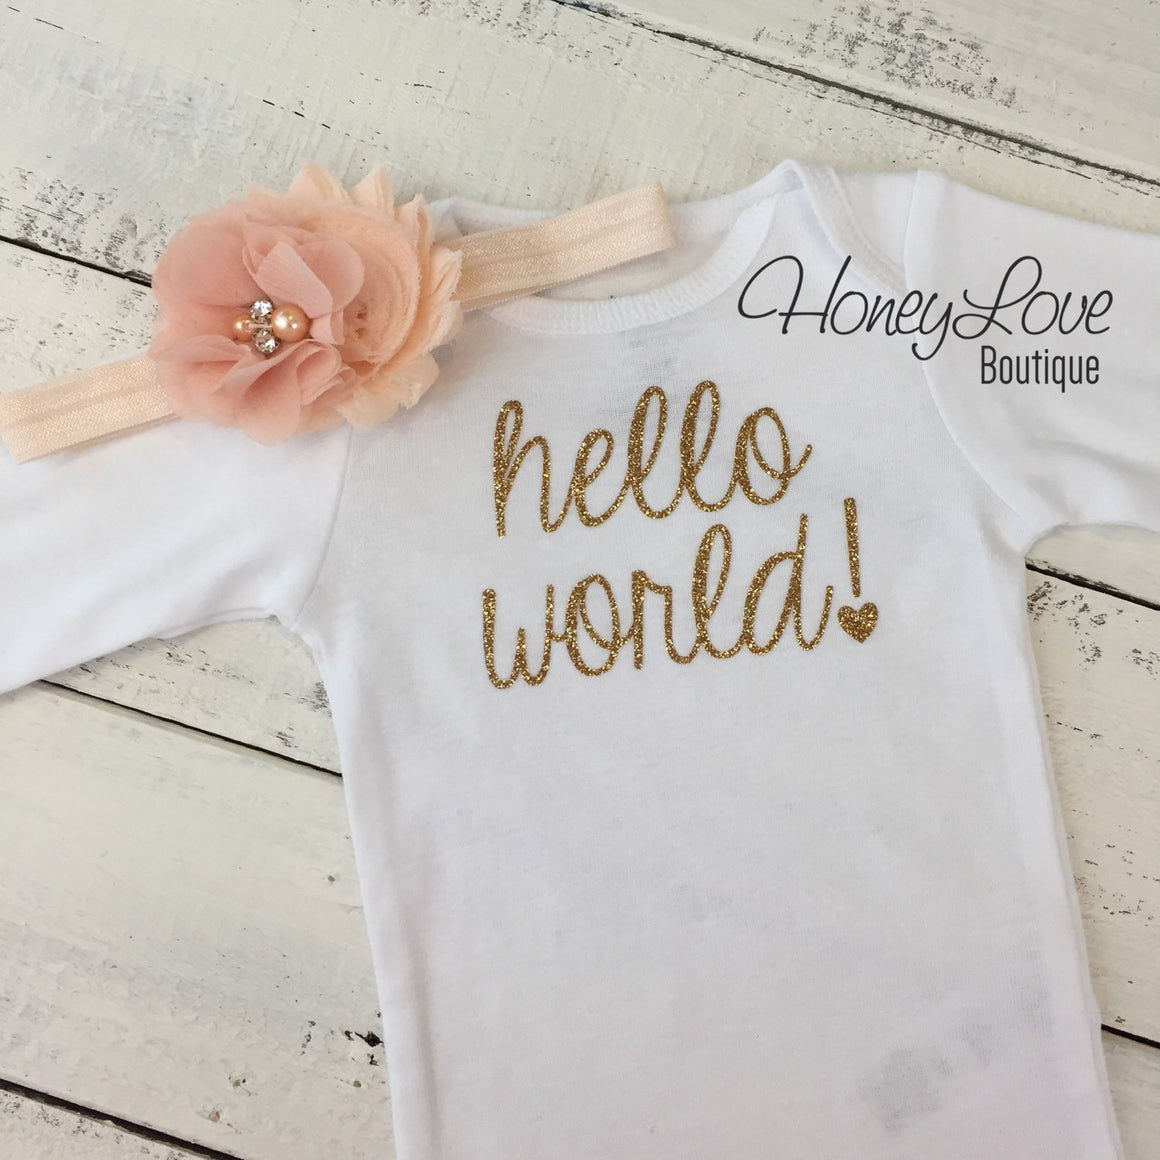 hello world! Outfit - Peach and Gold - HoneyLoveBoutique